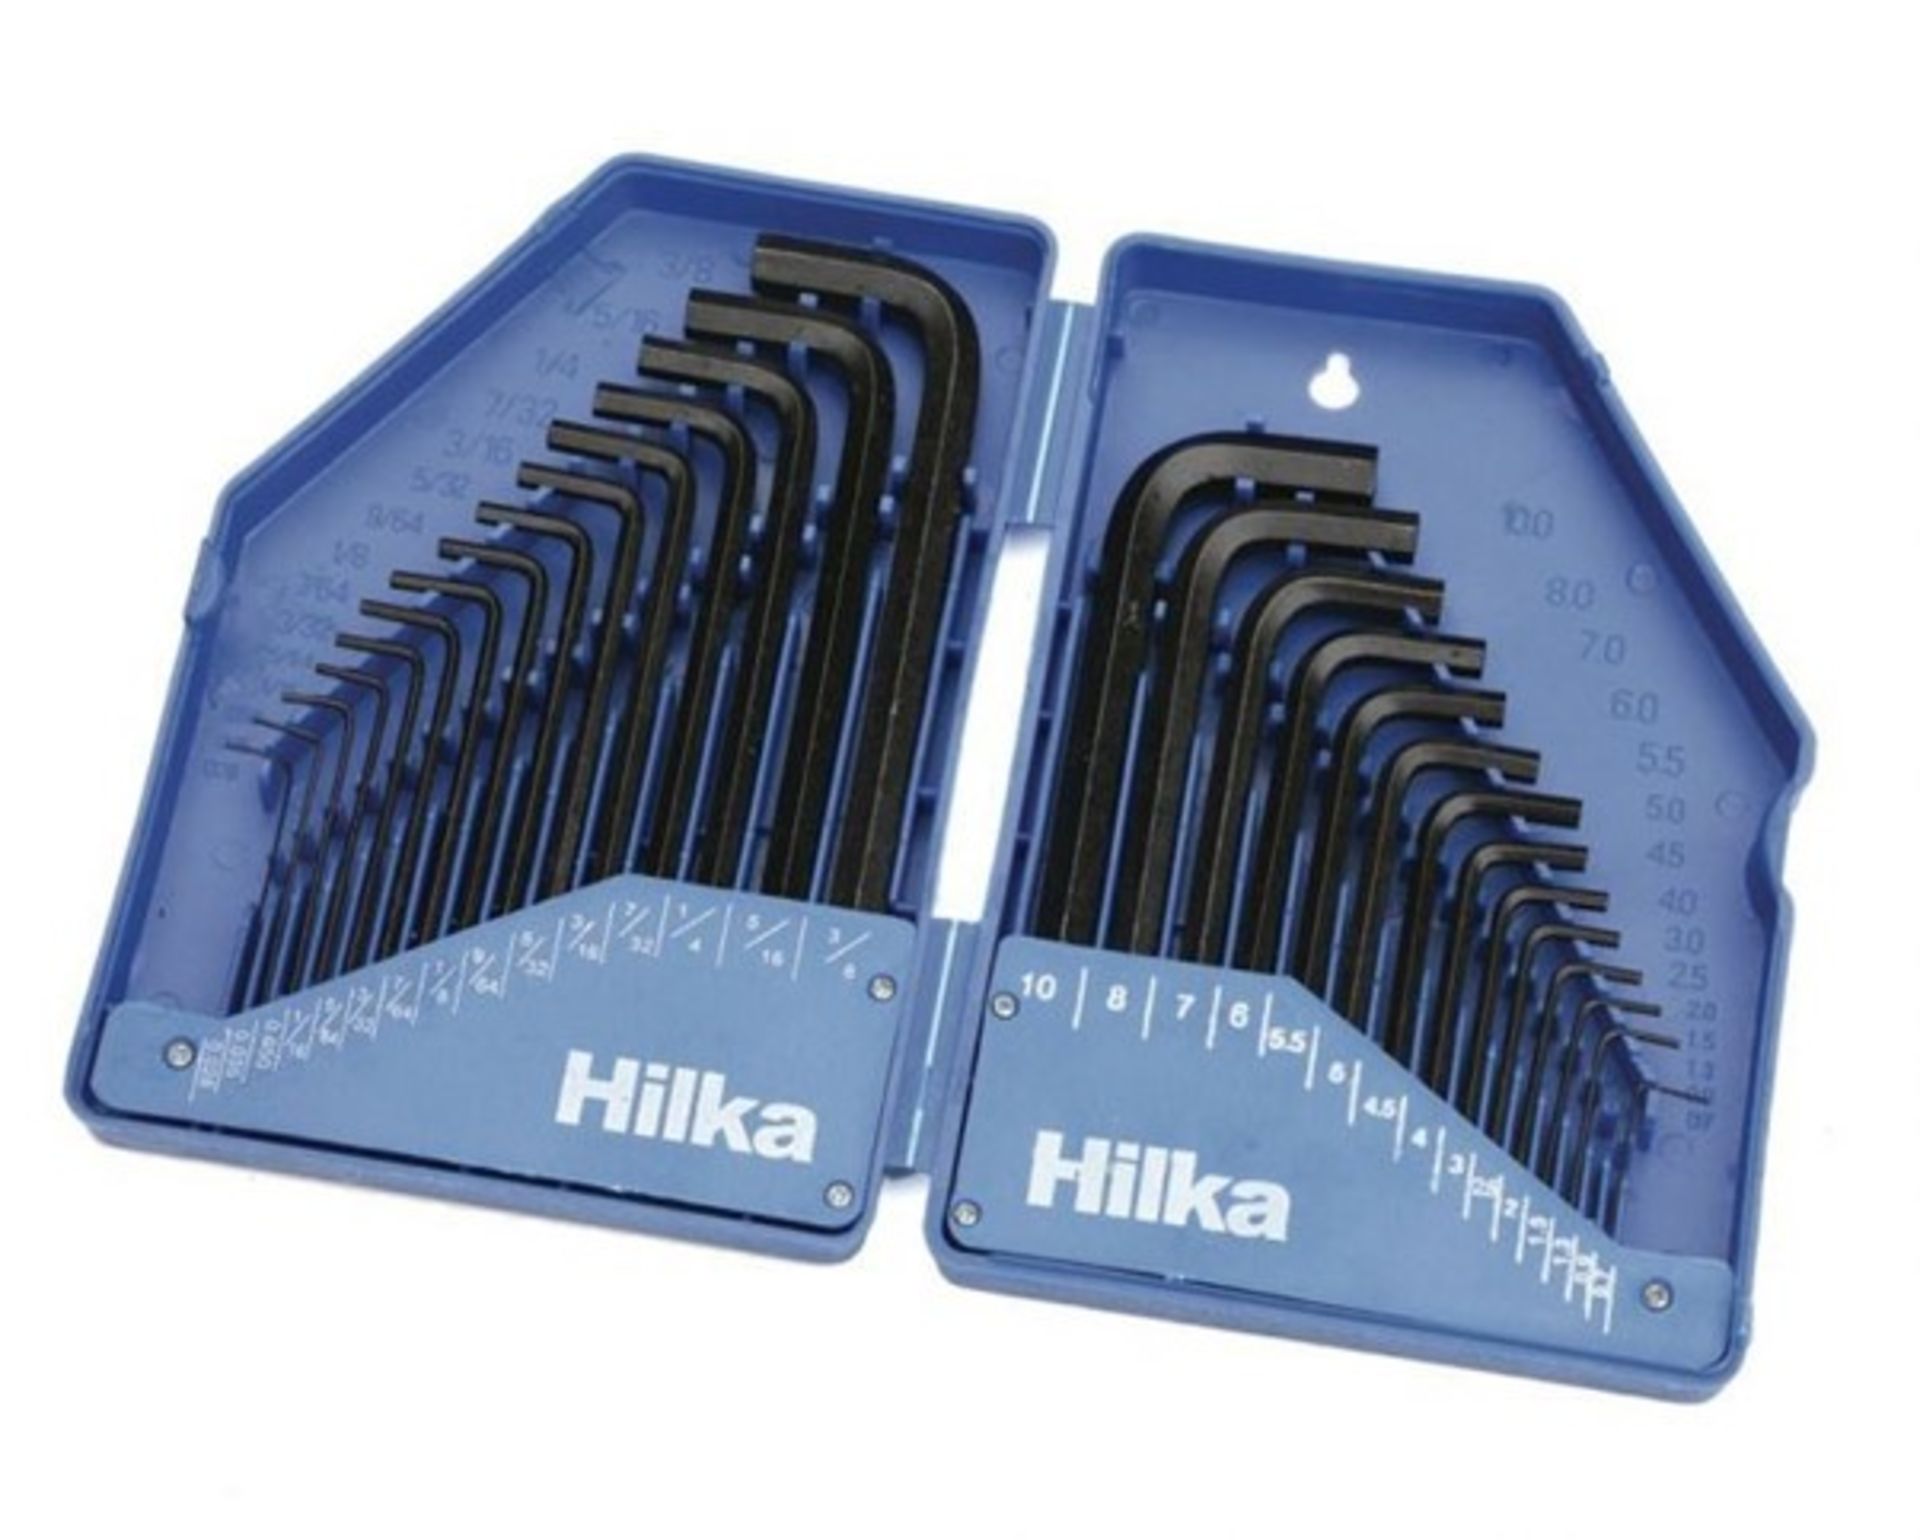 New Hilka 30 pce Hex Key Set in Folding Case - Contains: 15 metric sizes: 0.7, 0.9, 1.3, 1.5, 2.0,